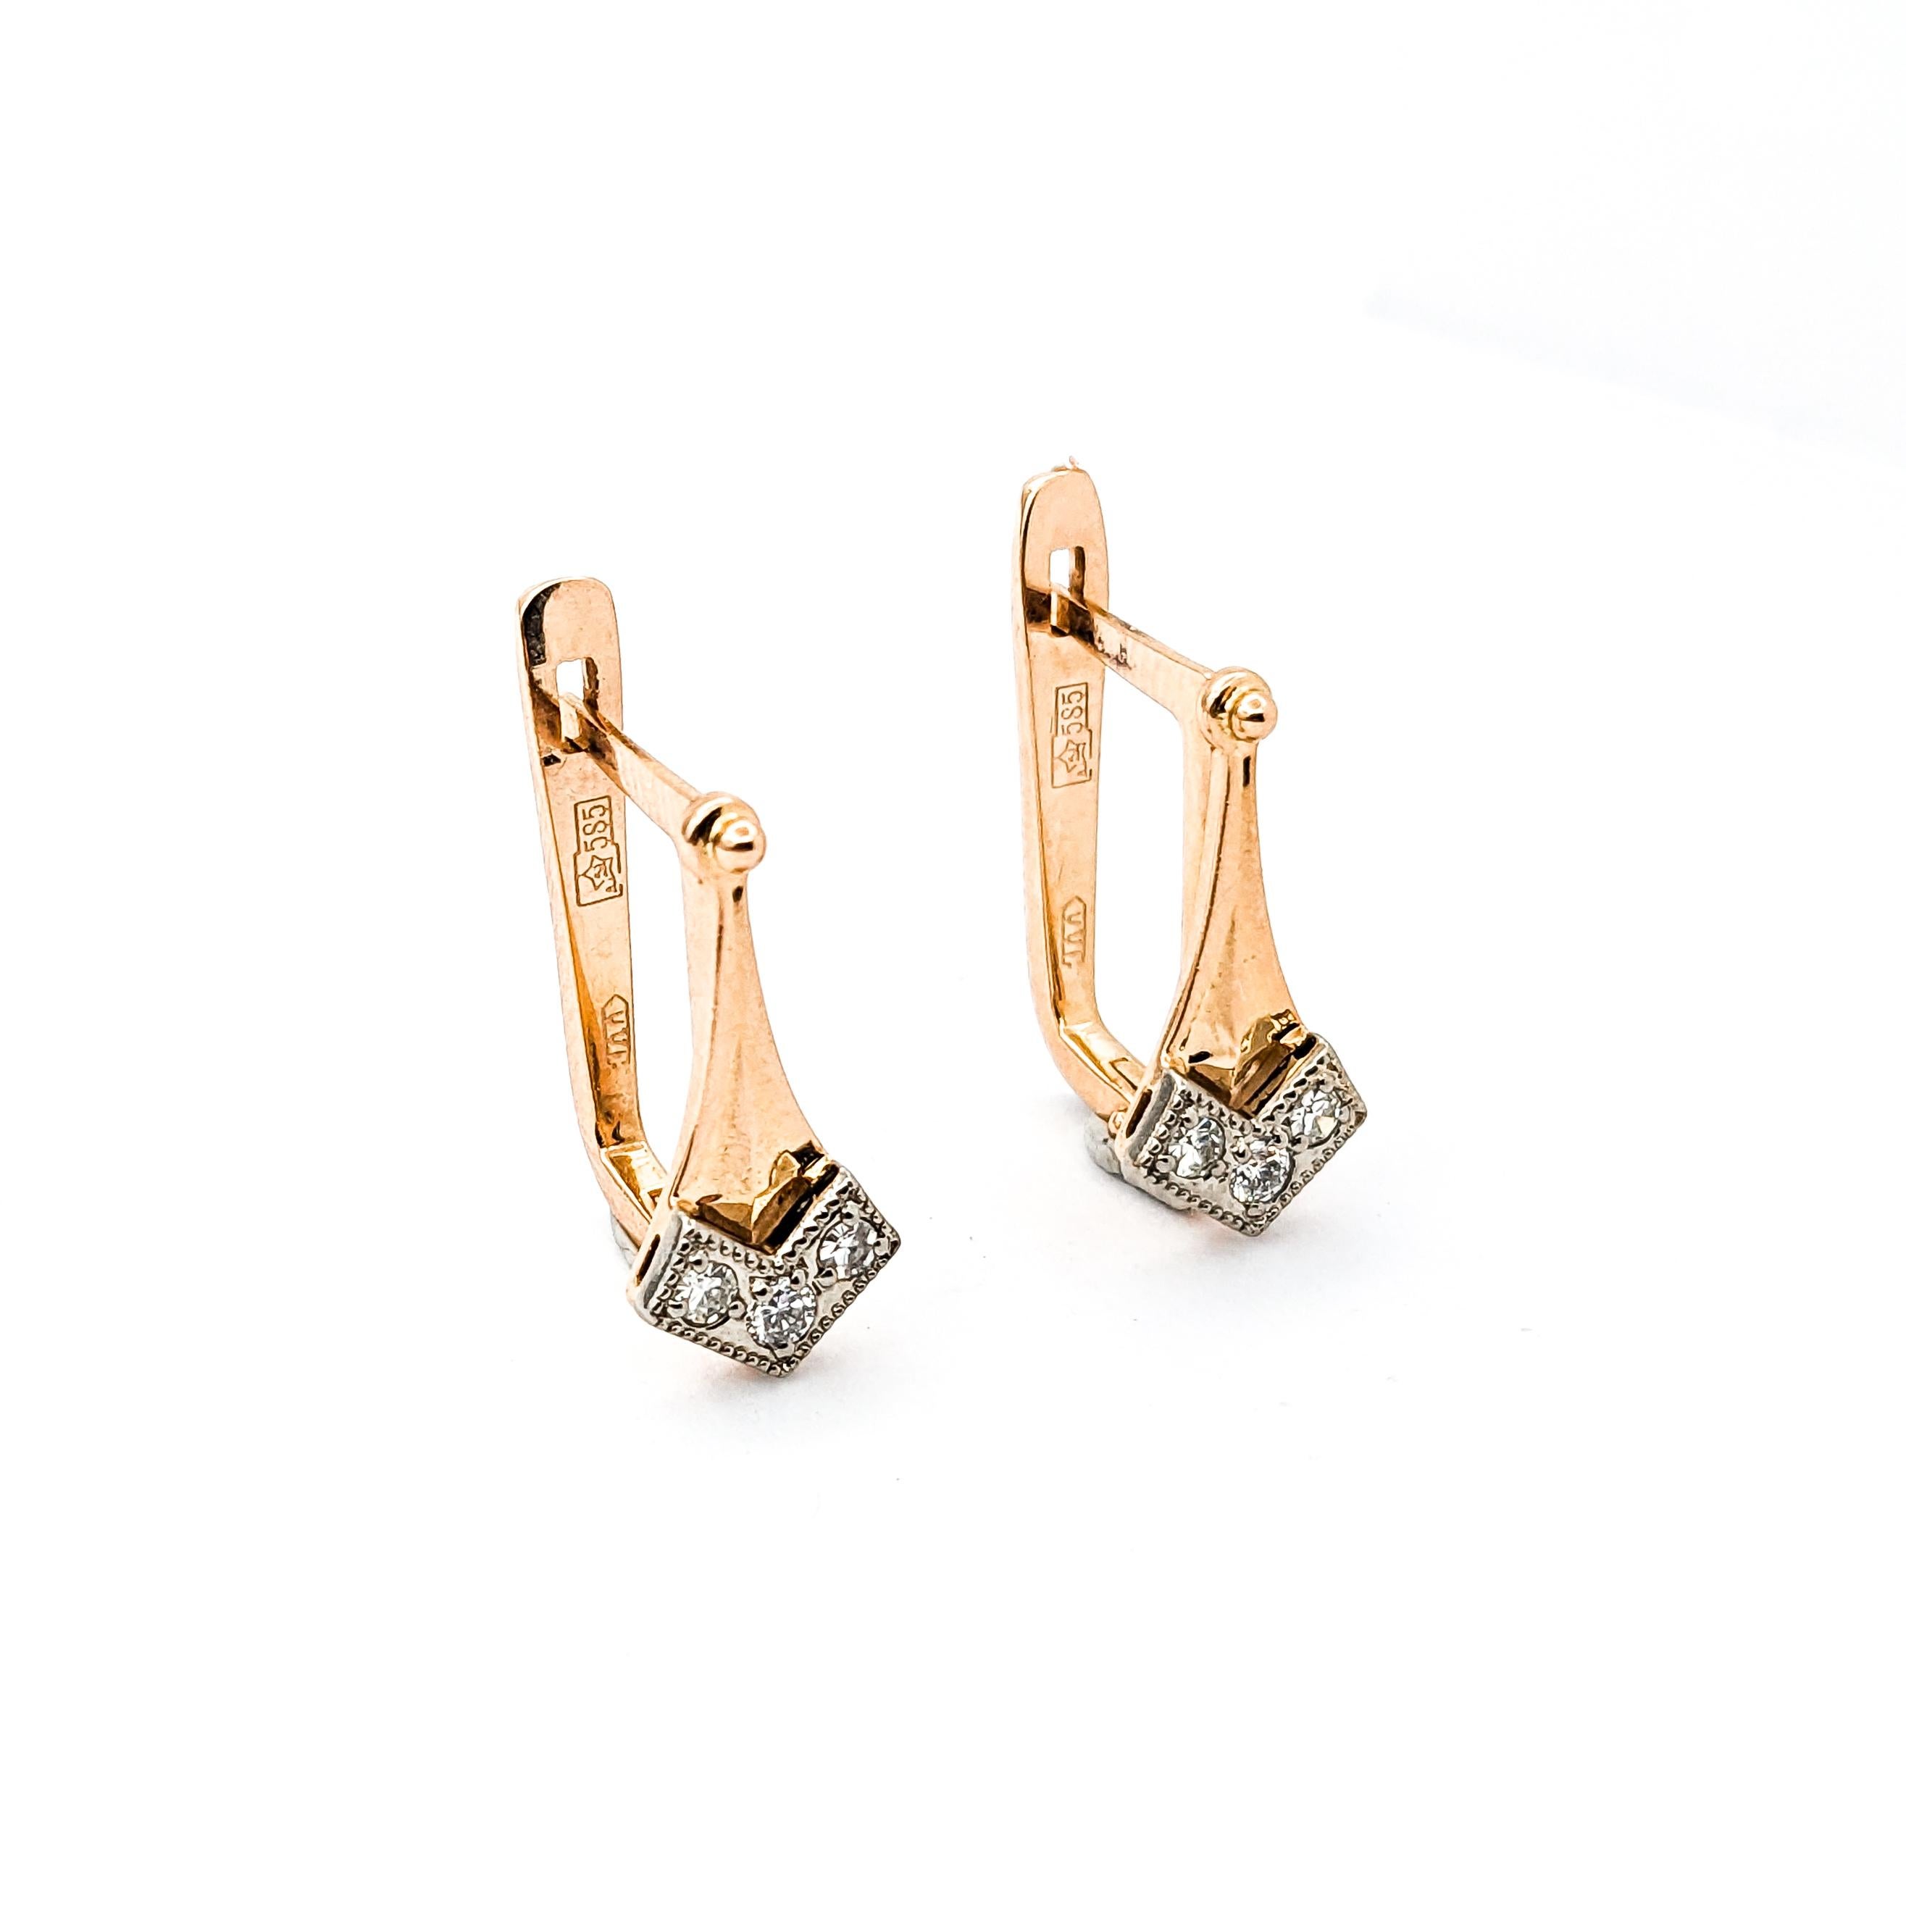 .20ctw Diamond Stud Lever Back Earrings In Rose Gold

These elegant mid-century earrings are finely crafted in 14kt rose gold and adorned with .20ctw of diamonds. These diamonds, boasting SI clarity and a near colorless white hue, exude a brilliant